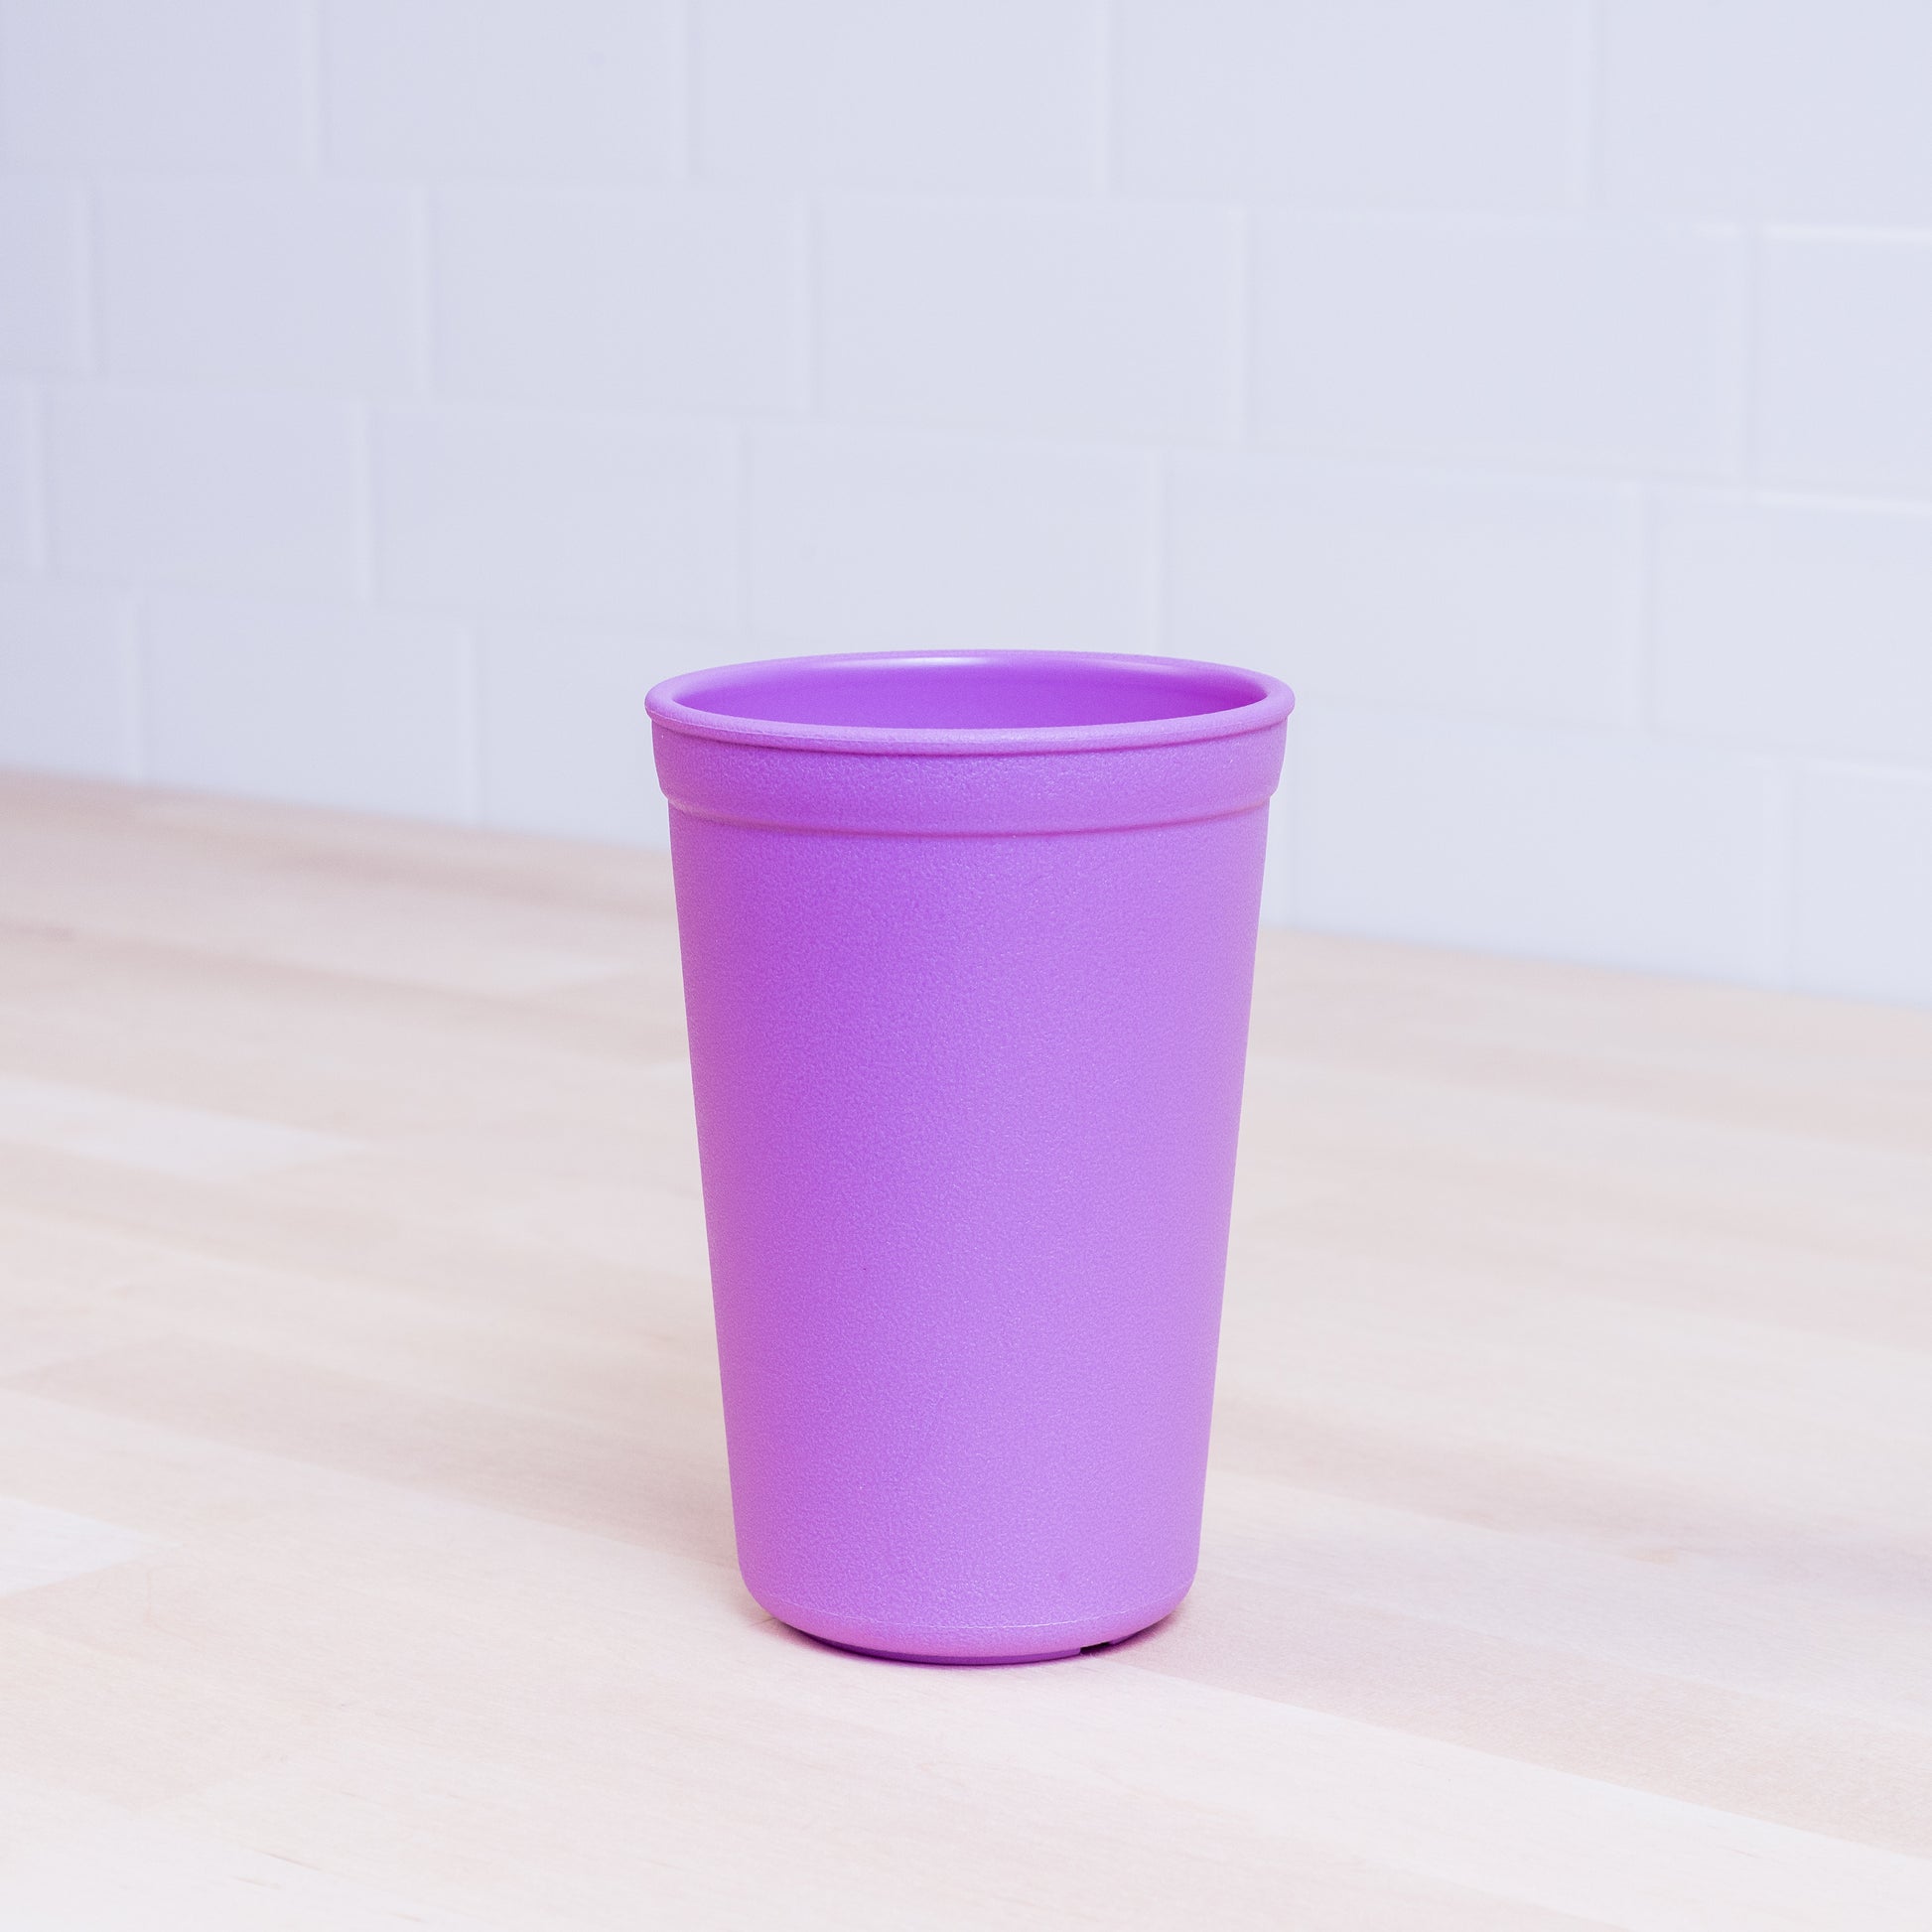 Re-Play Tumbler in Purple from Bear & Moo